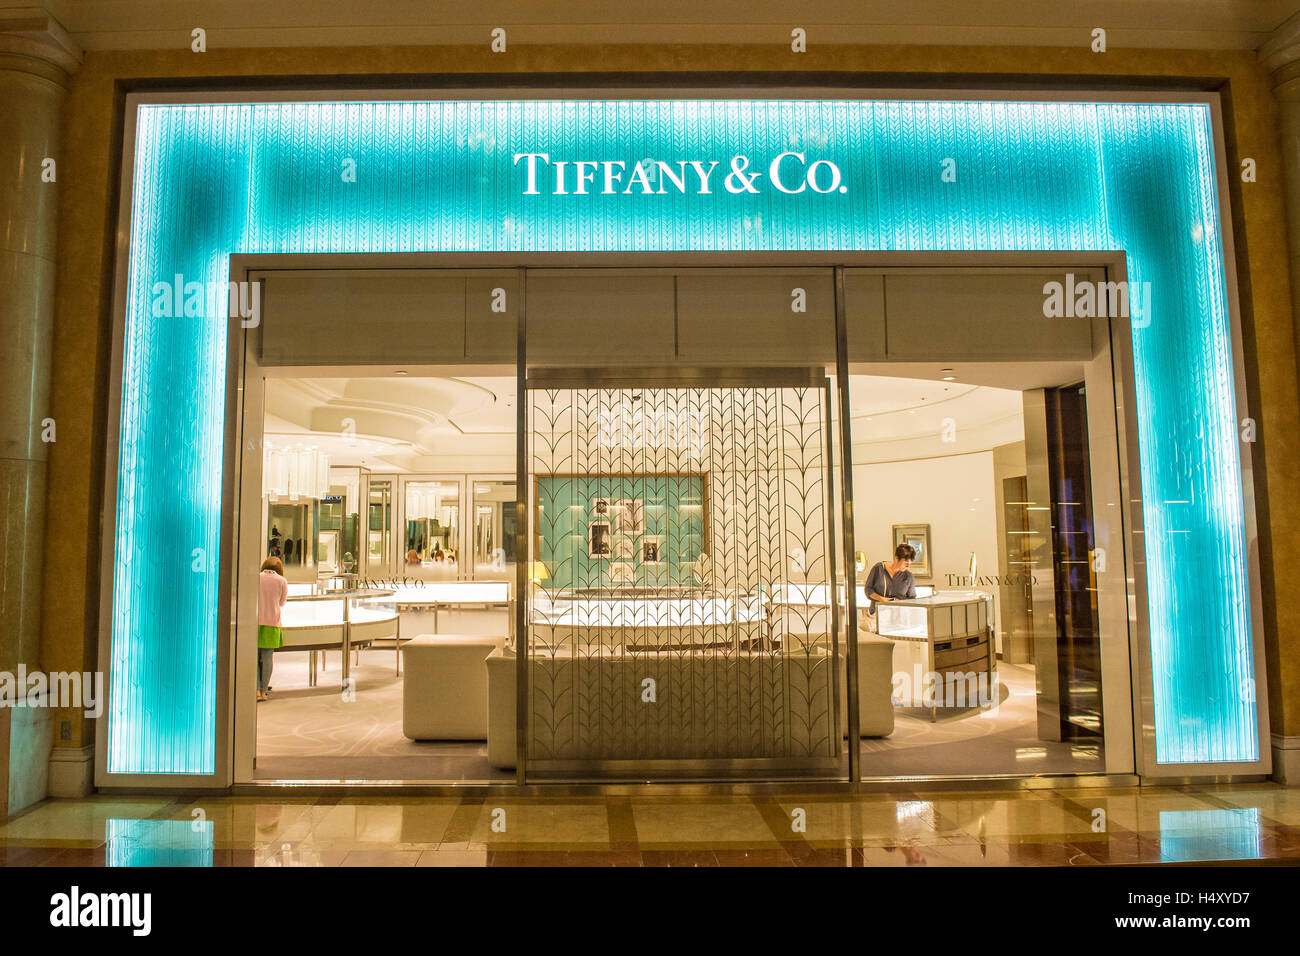 Tiffany s store editorial photo. Image of buying, retail - 70491546